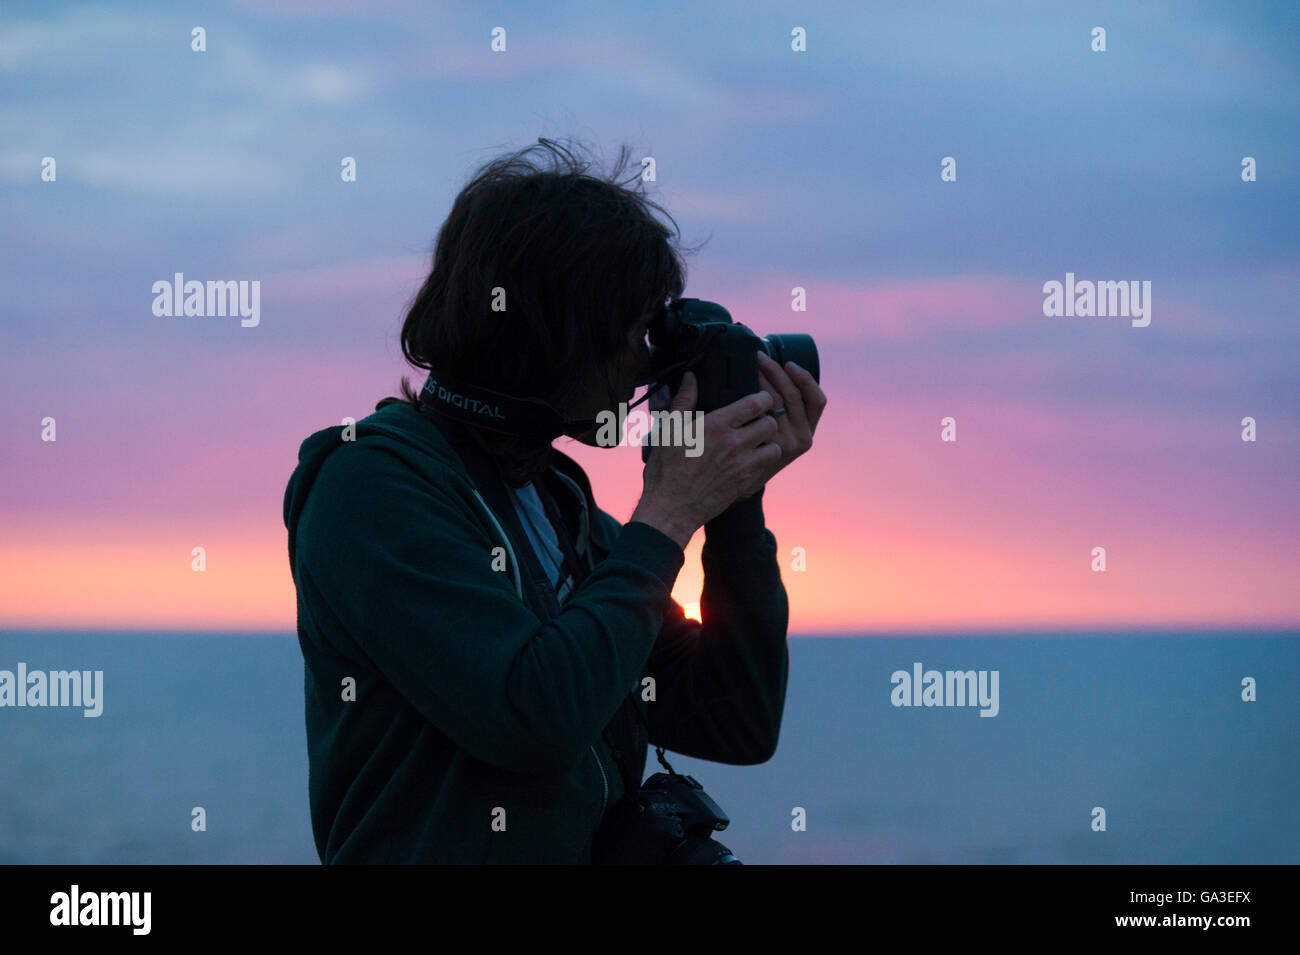 A silhouette of a professional photographer man taking a photograph with a DSLR camera against a sunset Stock Photo